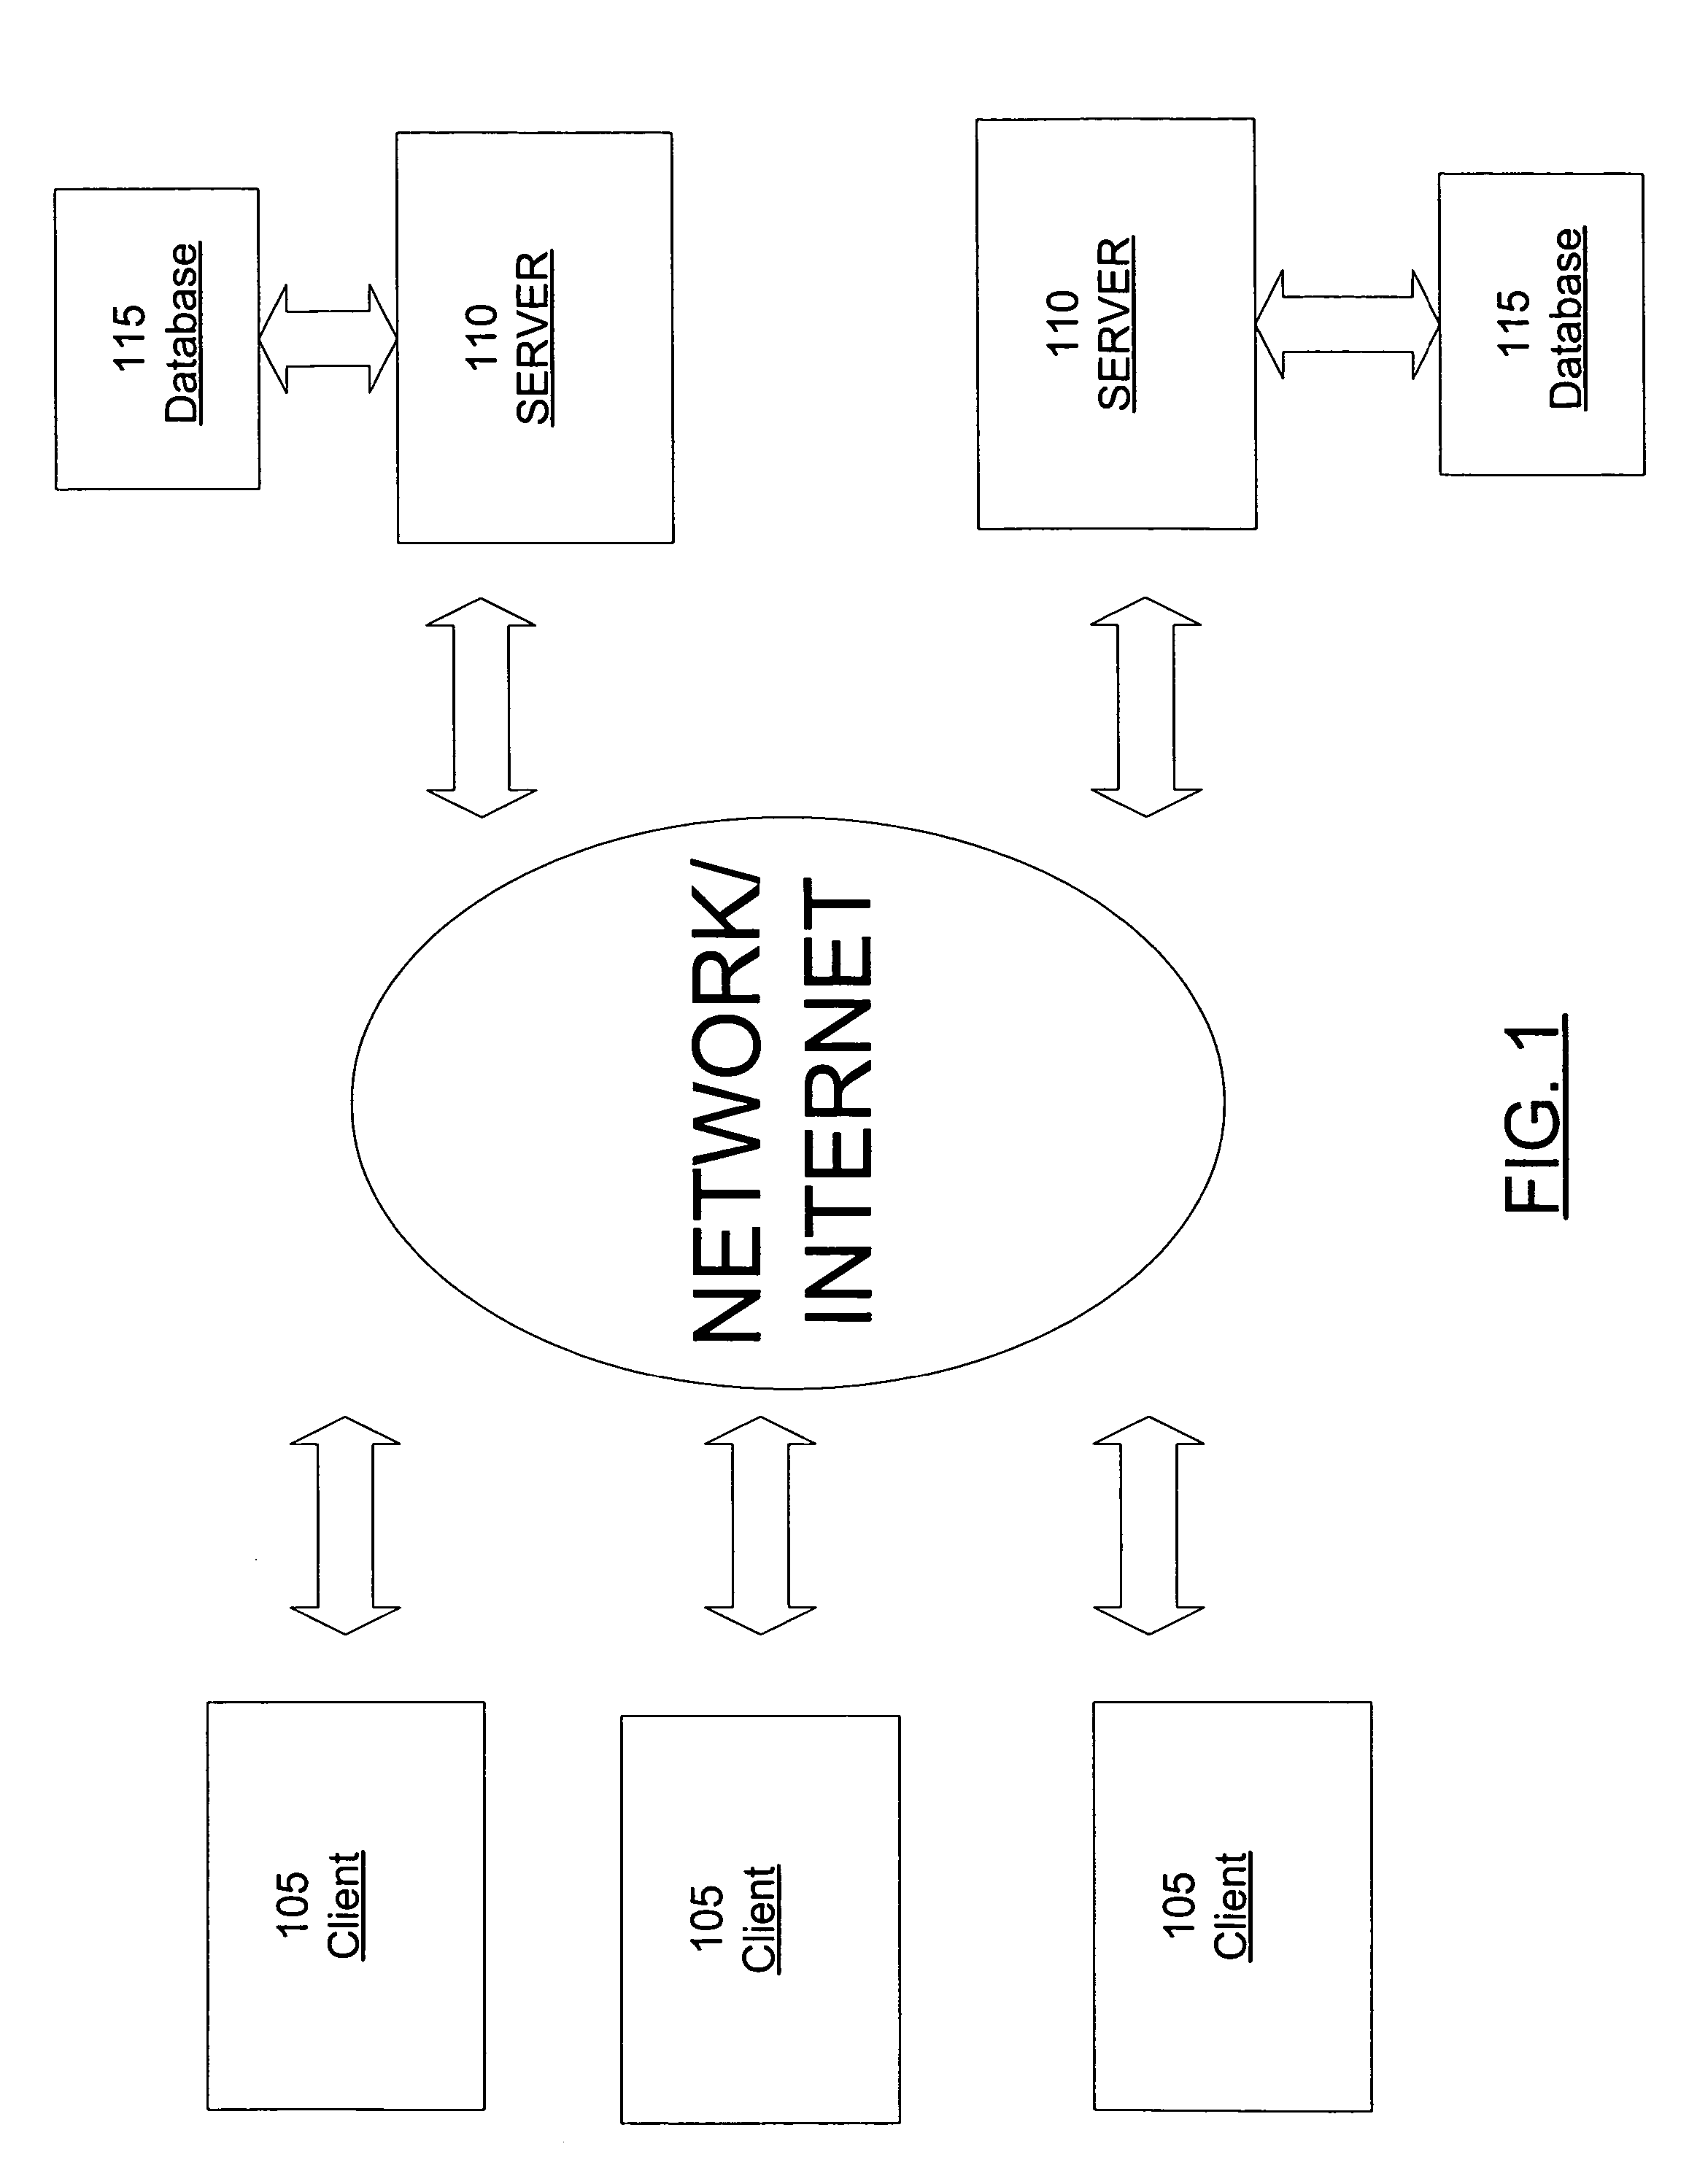 System and method for facilitating product placement advertising